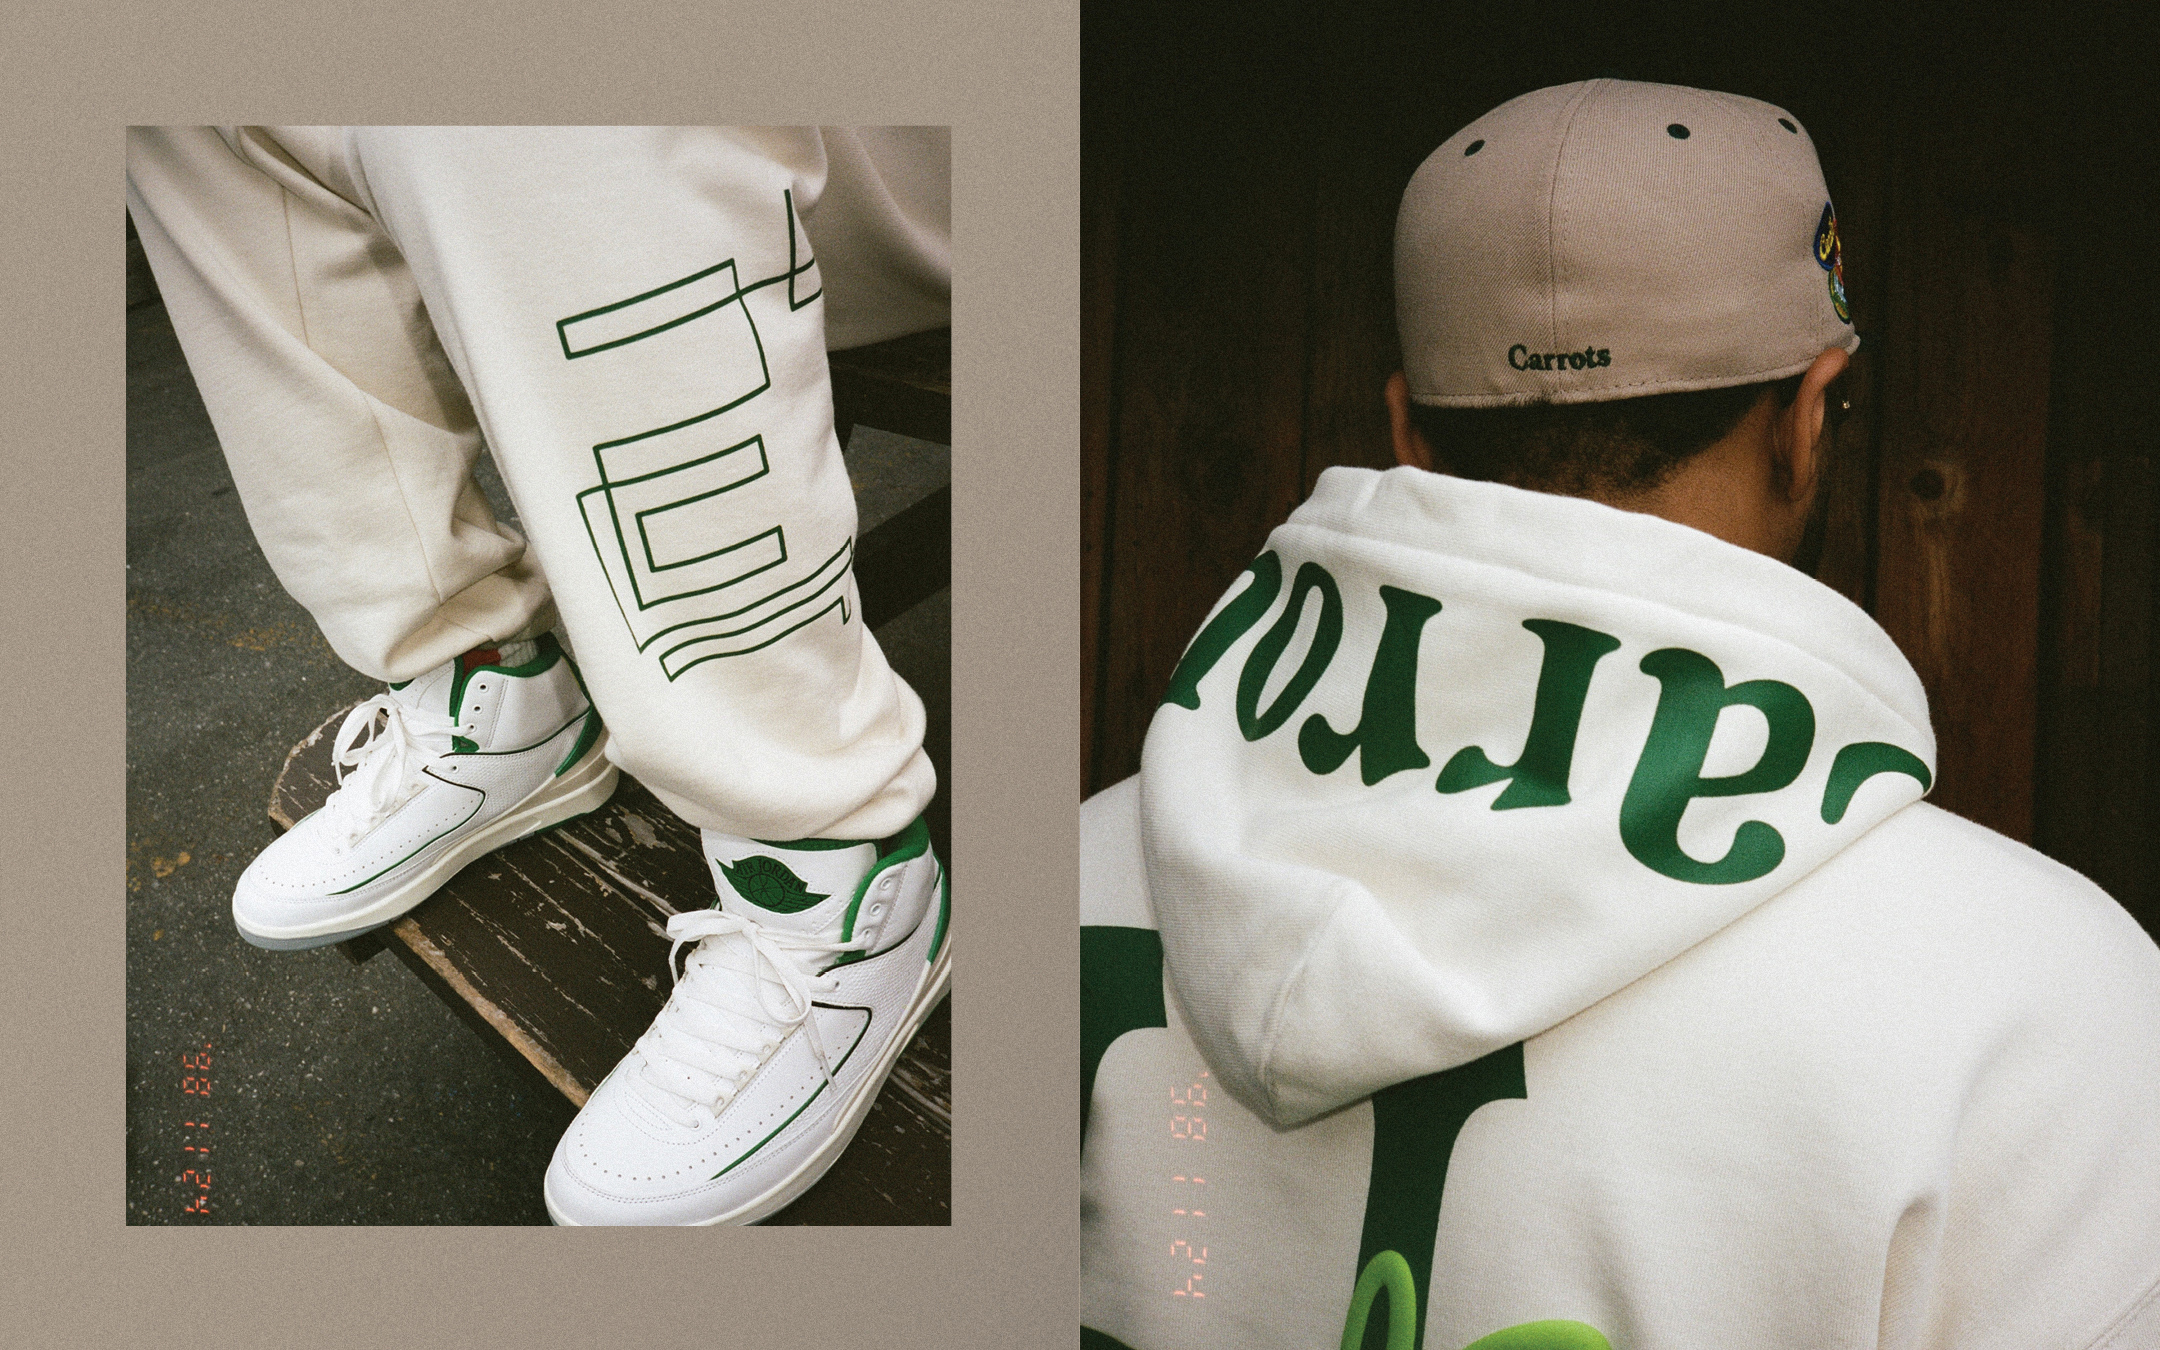 PRODUCTS] HUF × CARROTS | VHSMAG